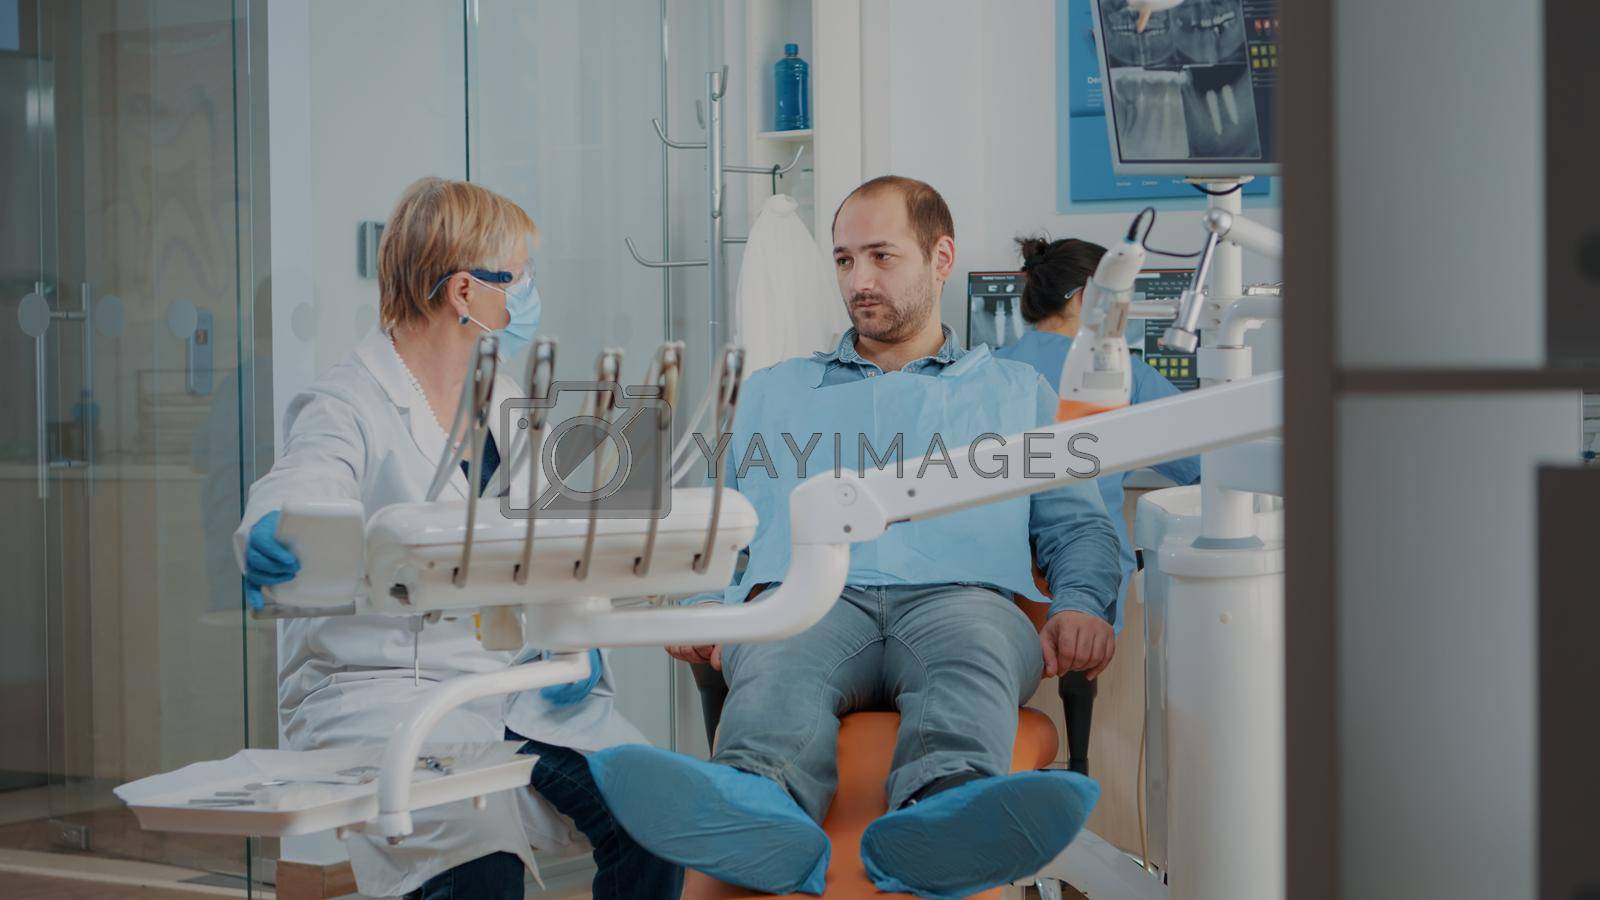 Stomatologist doing dental examination with orthodontic tools and instruments, treating patient with toothache. Dentist using drill and dentistry equipment at oral care examination.